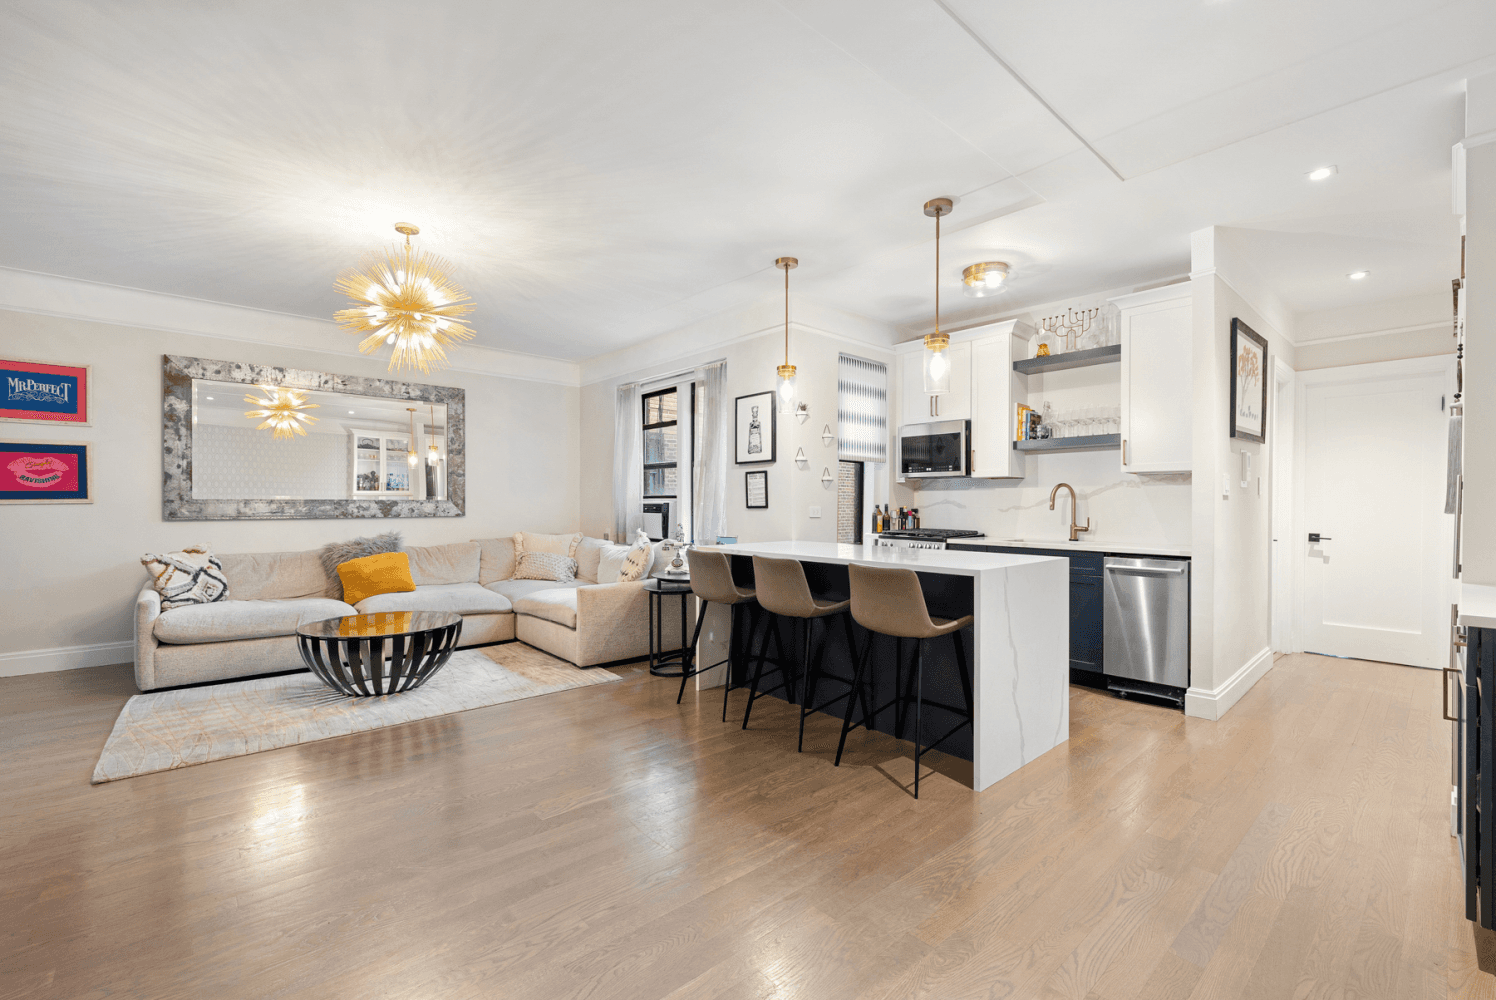 Contemporary design meets pre war charm in this recently renovated 1 bedroom, 1 bathroom co op nestled on a quiet tree lined street in Lenox Hill.